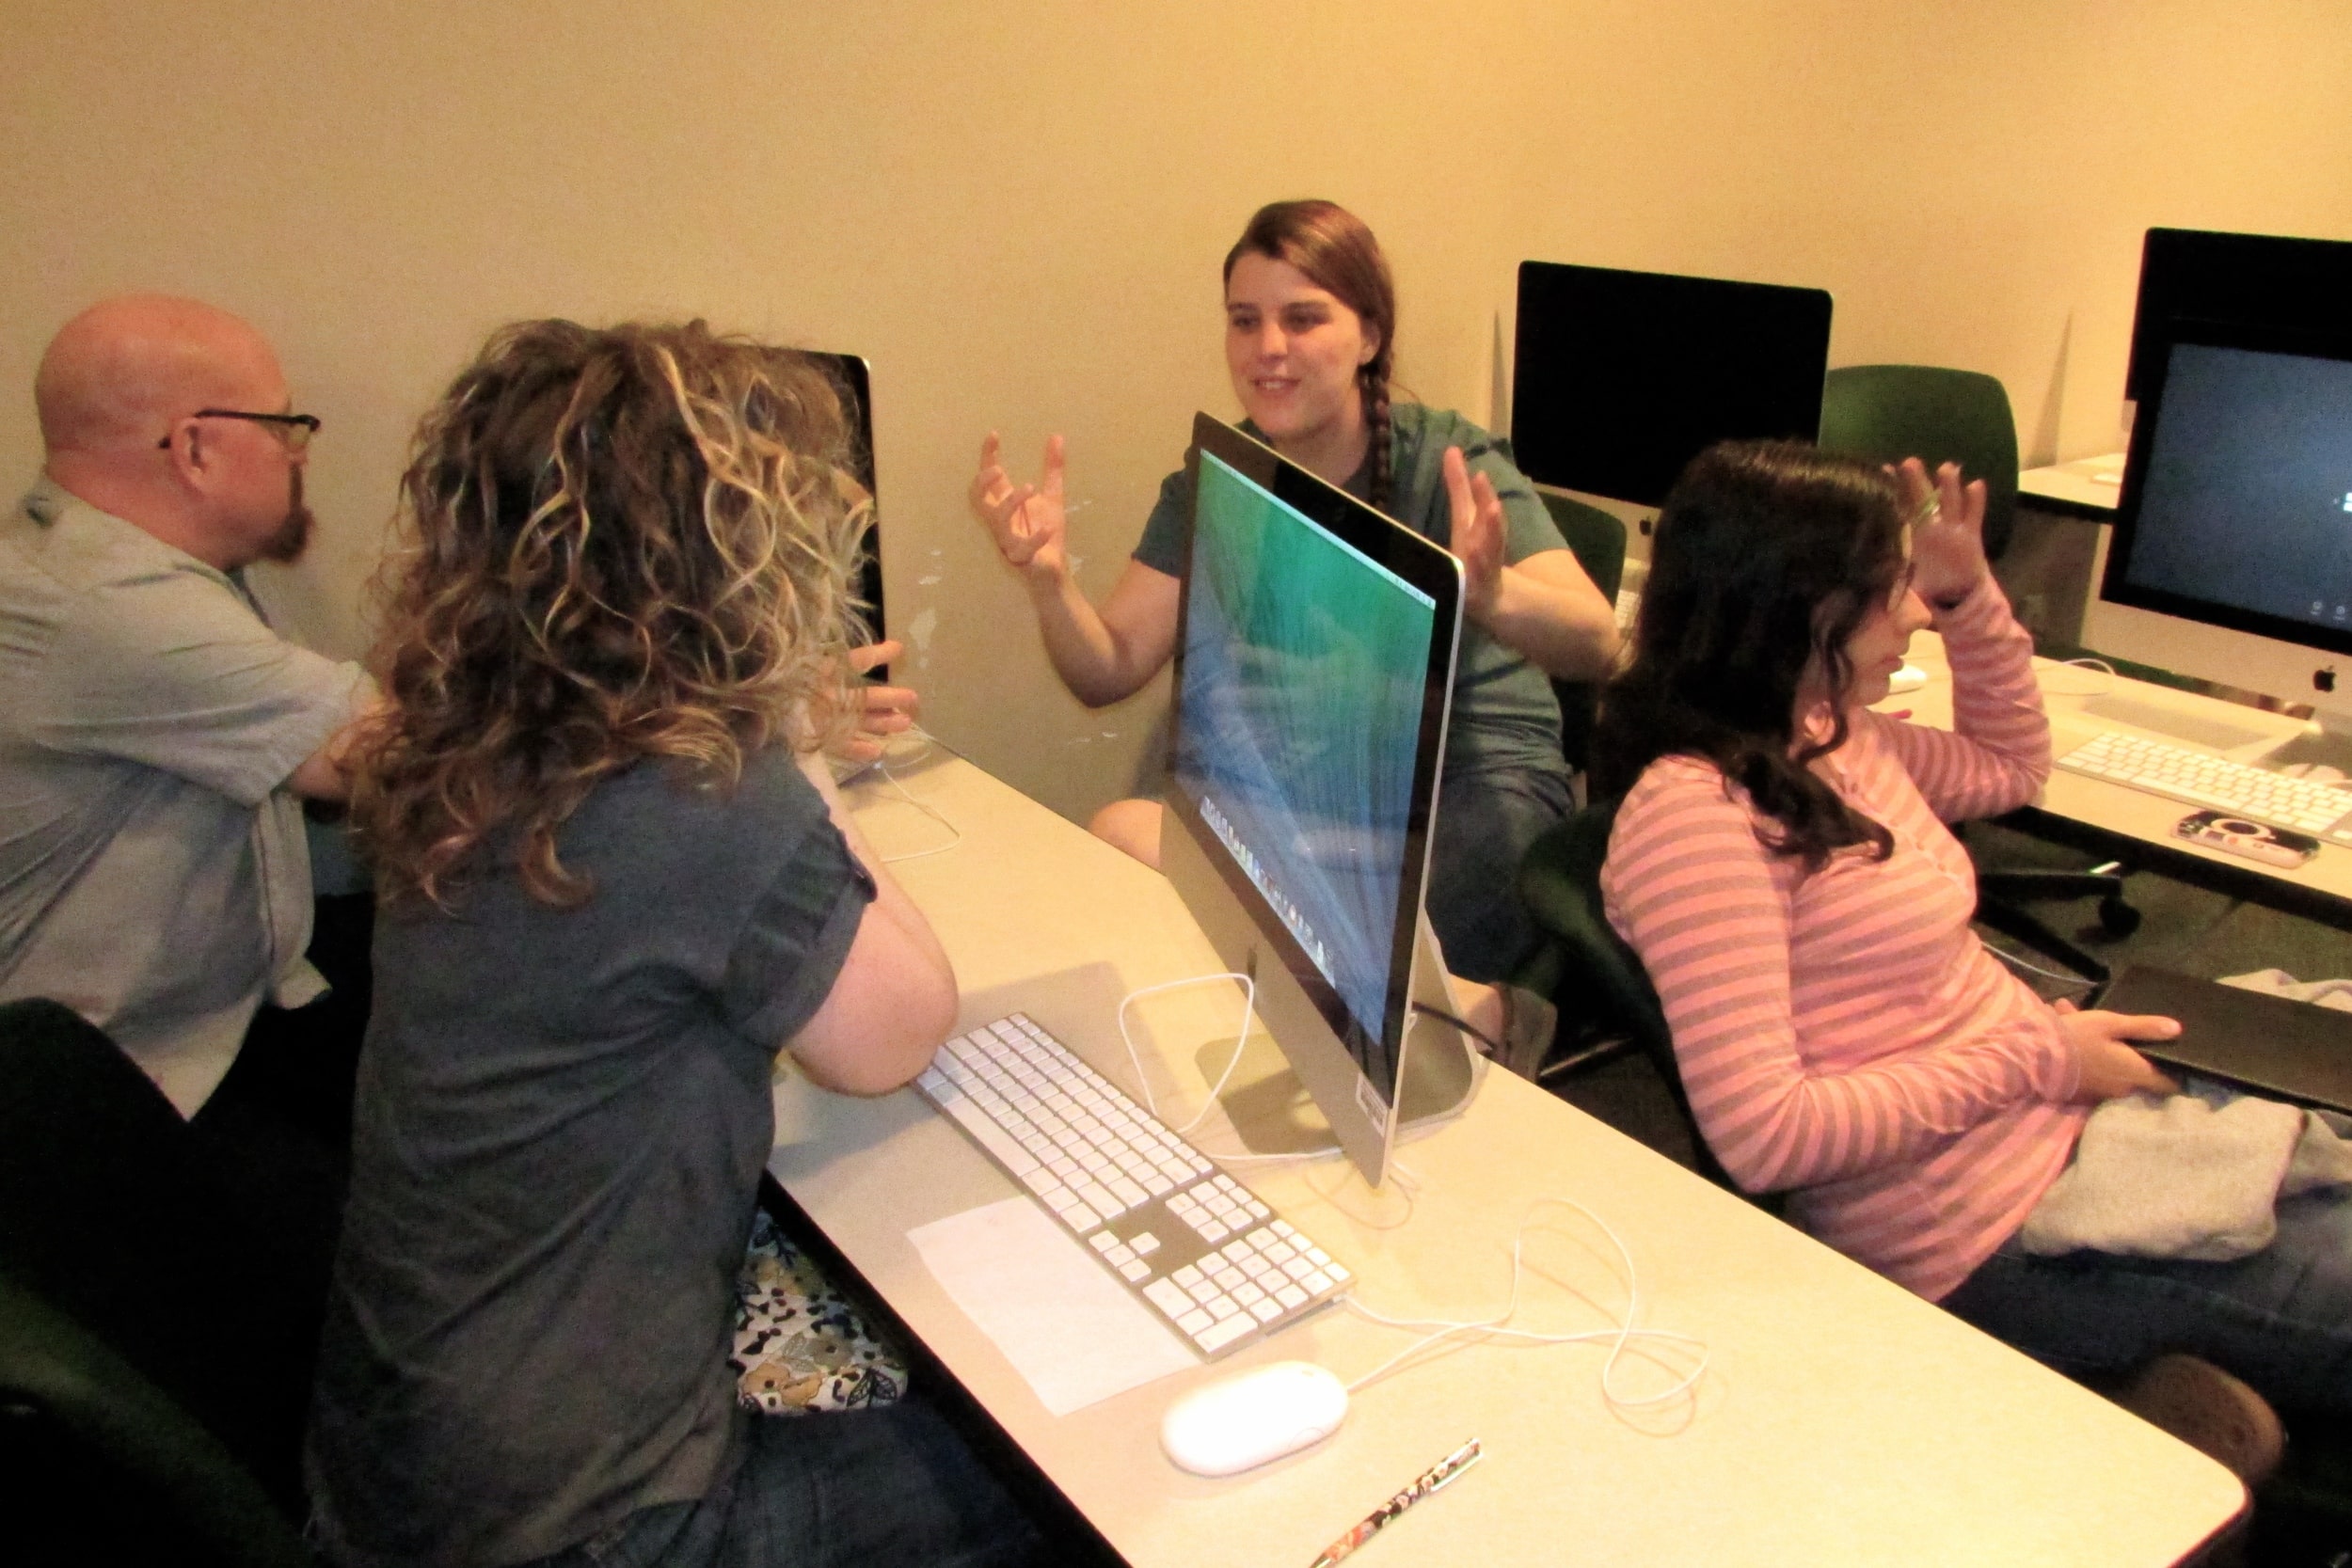 Students who write for "The Vision Online" discuss upcoming stories during a weekly meeting.